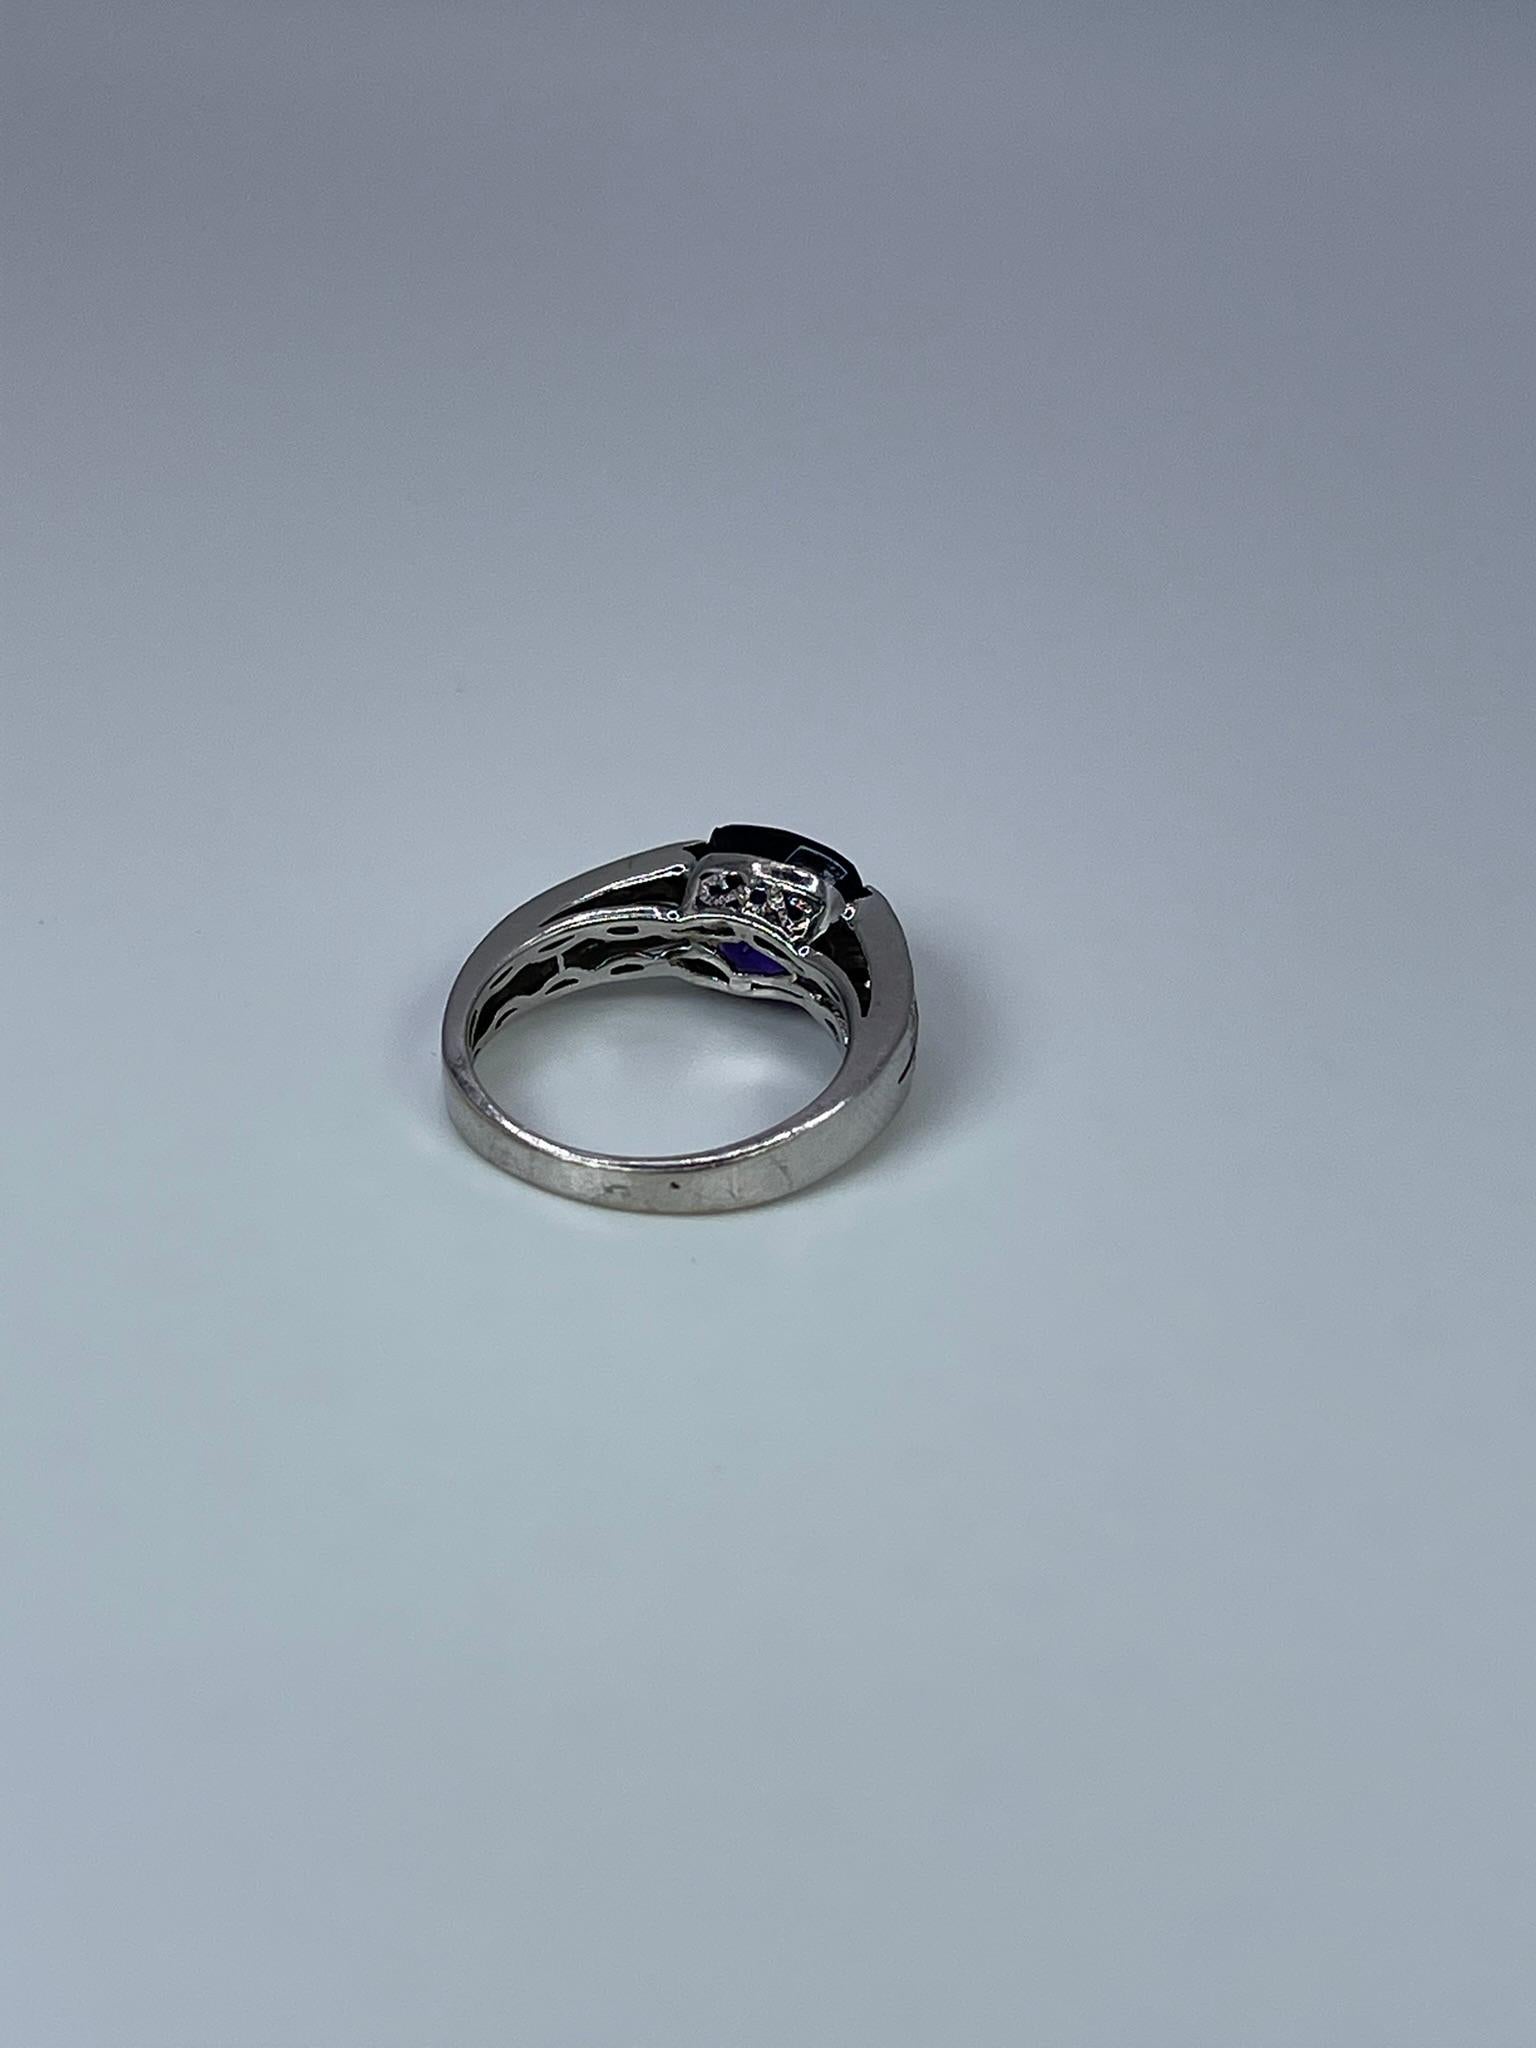 Amethyst & Diamond Cocktail Ring Purple Gemstone Diamond Ring 14kt White Gold In New Condition For Sale In Jupiter, FL